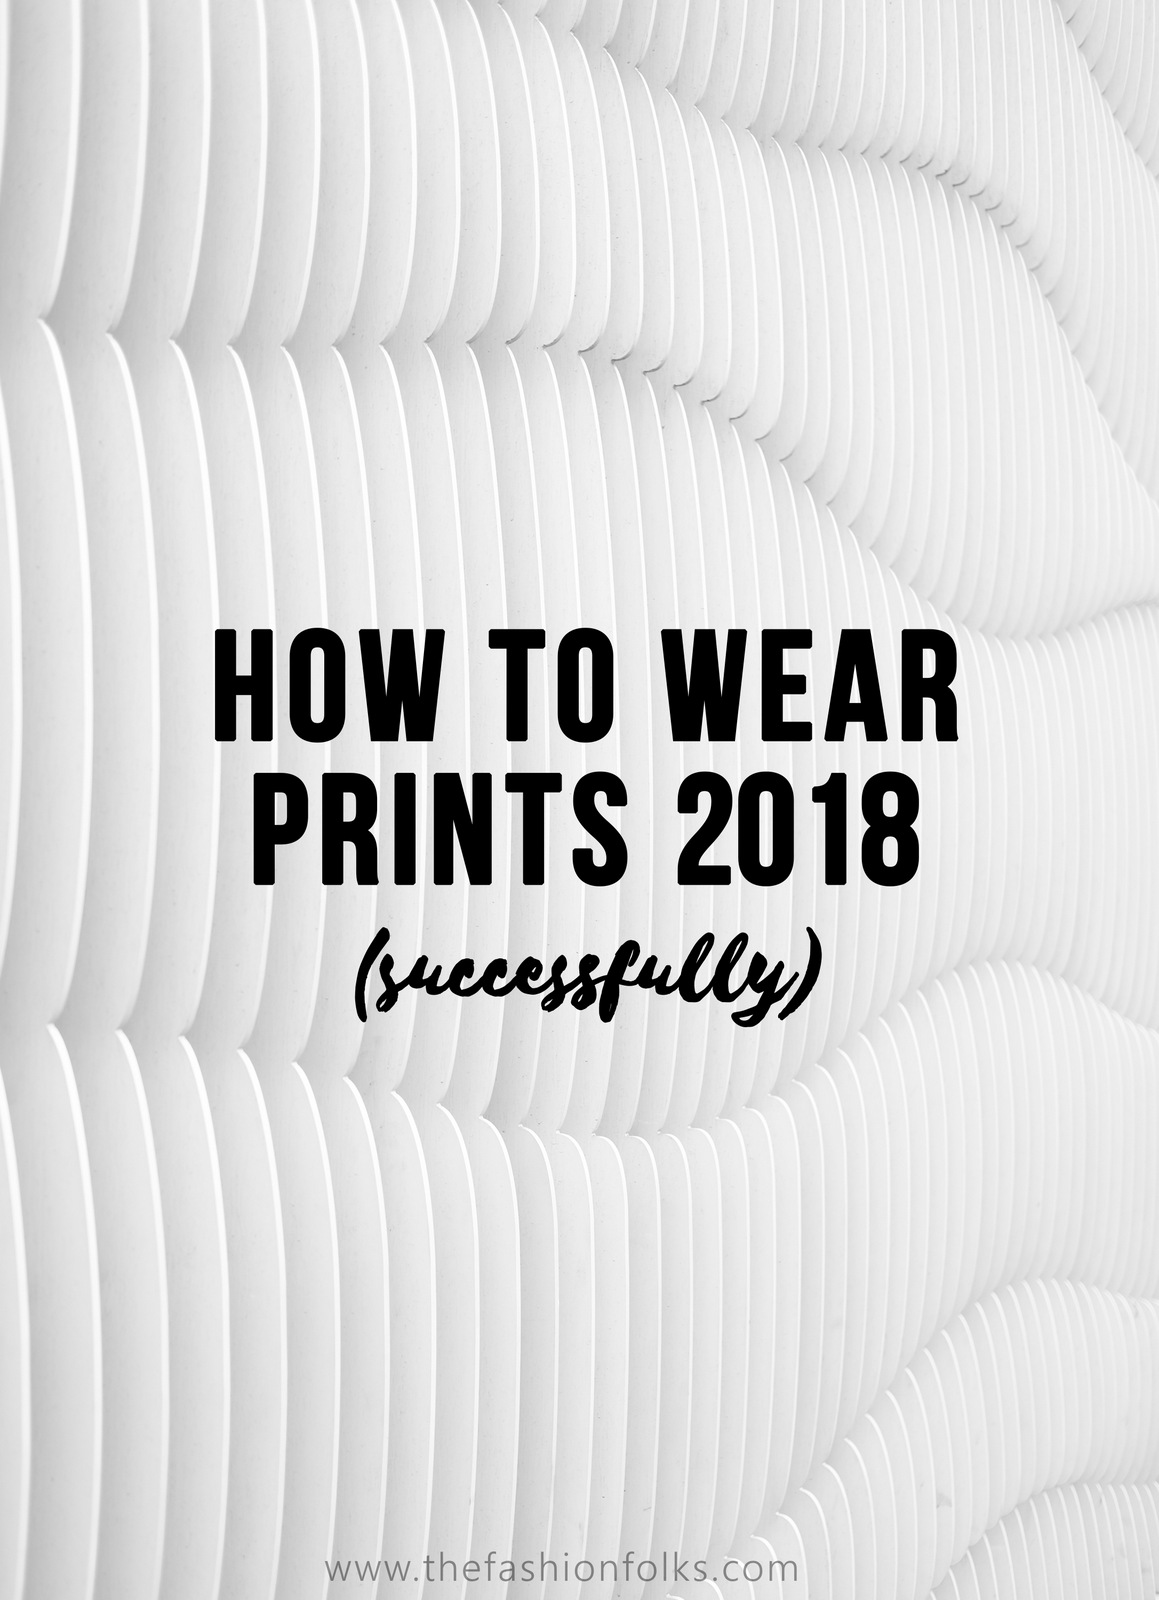 How To Wear Prints Succesfully 2018